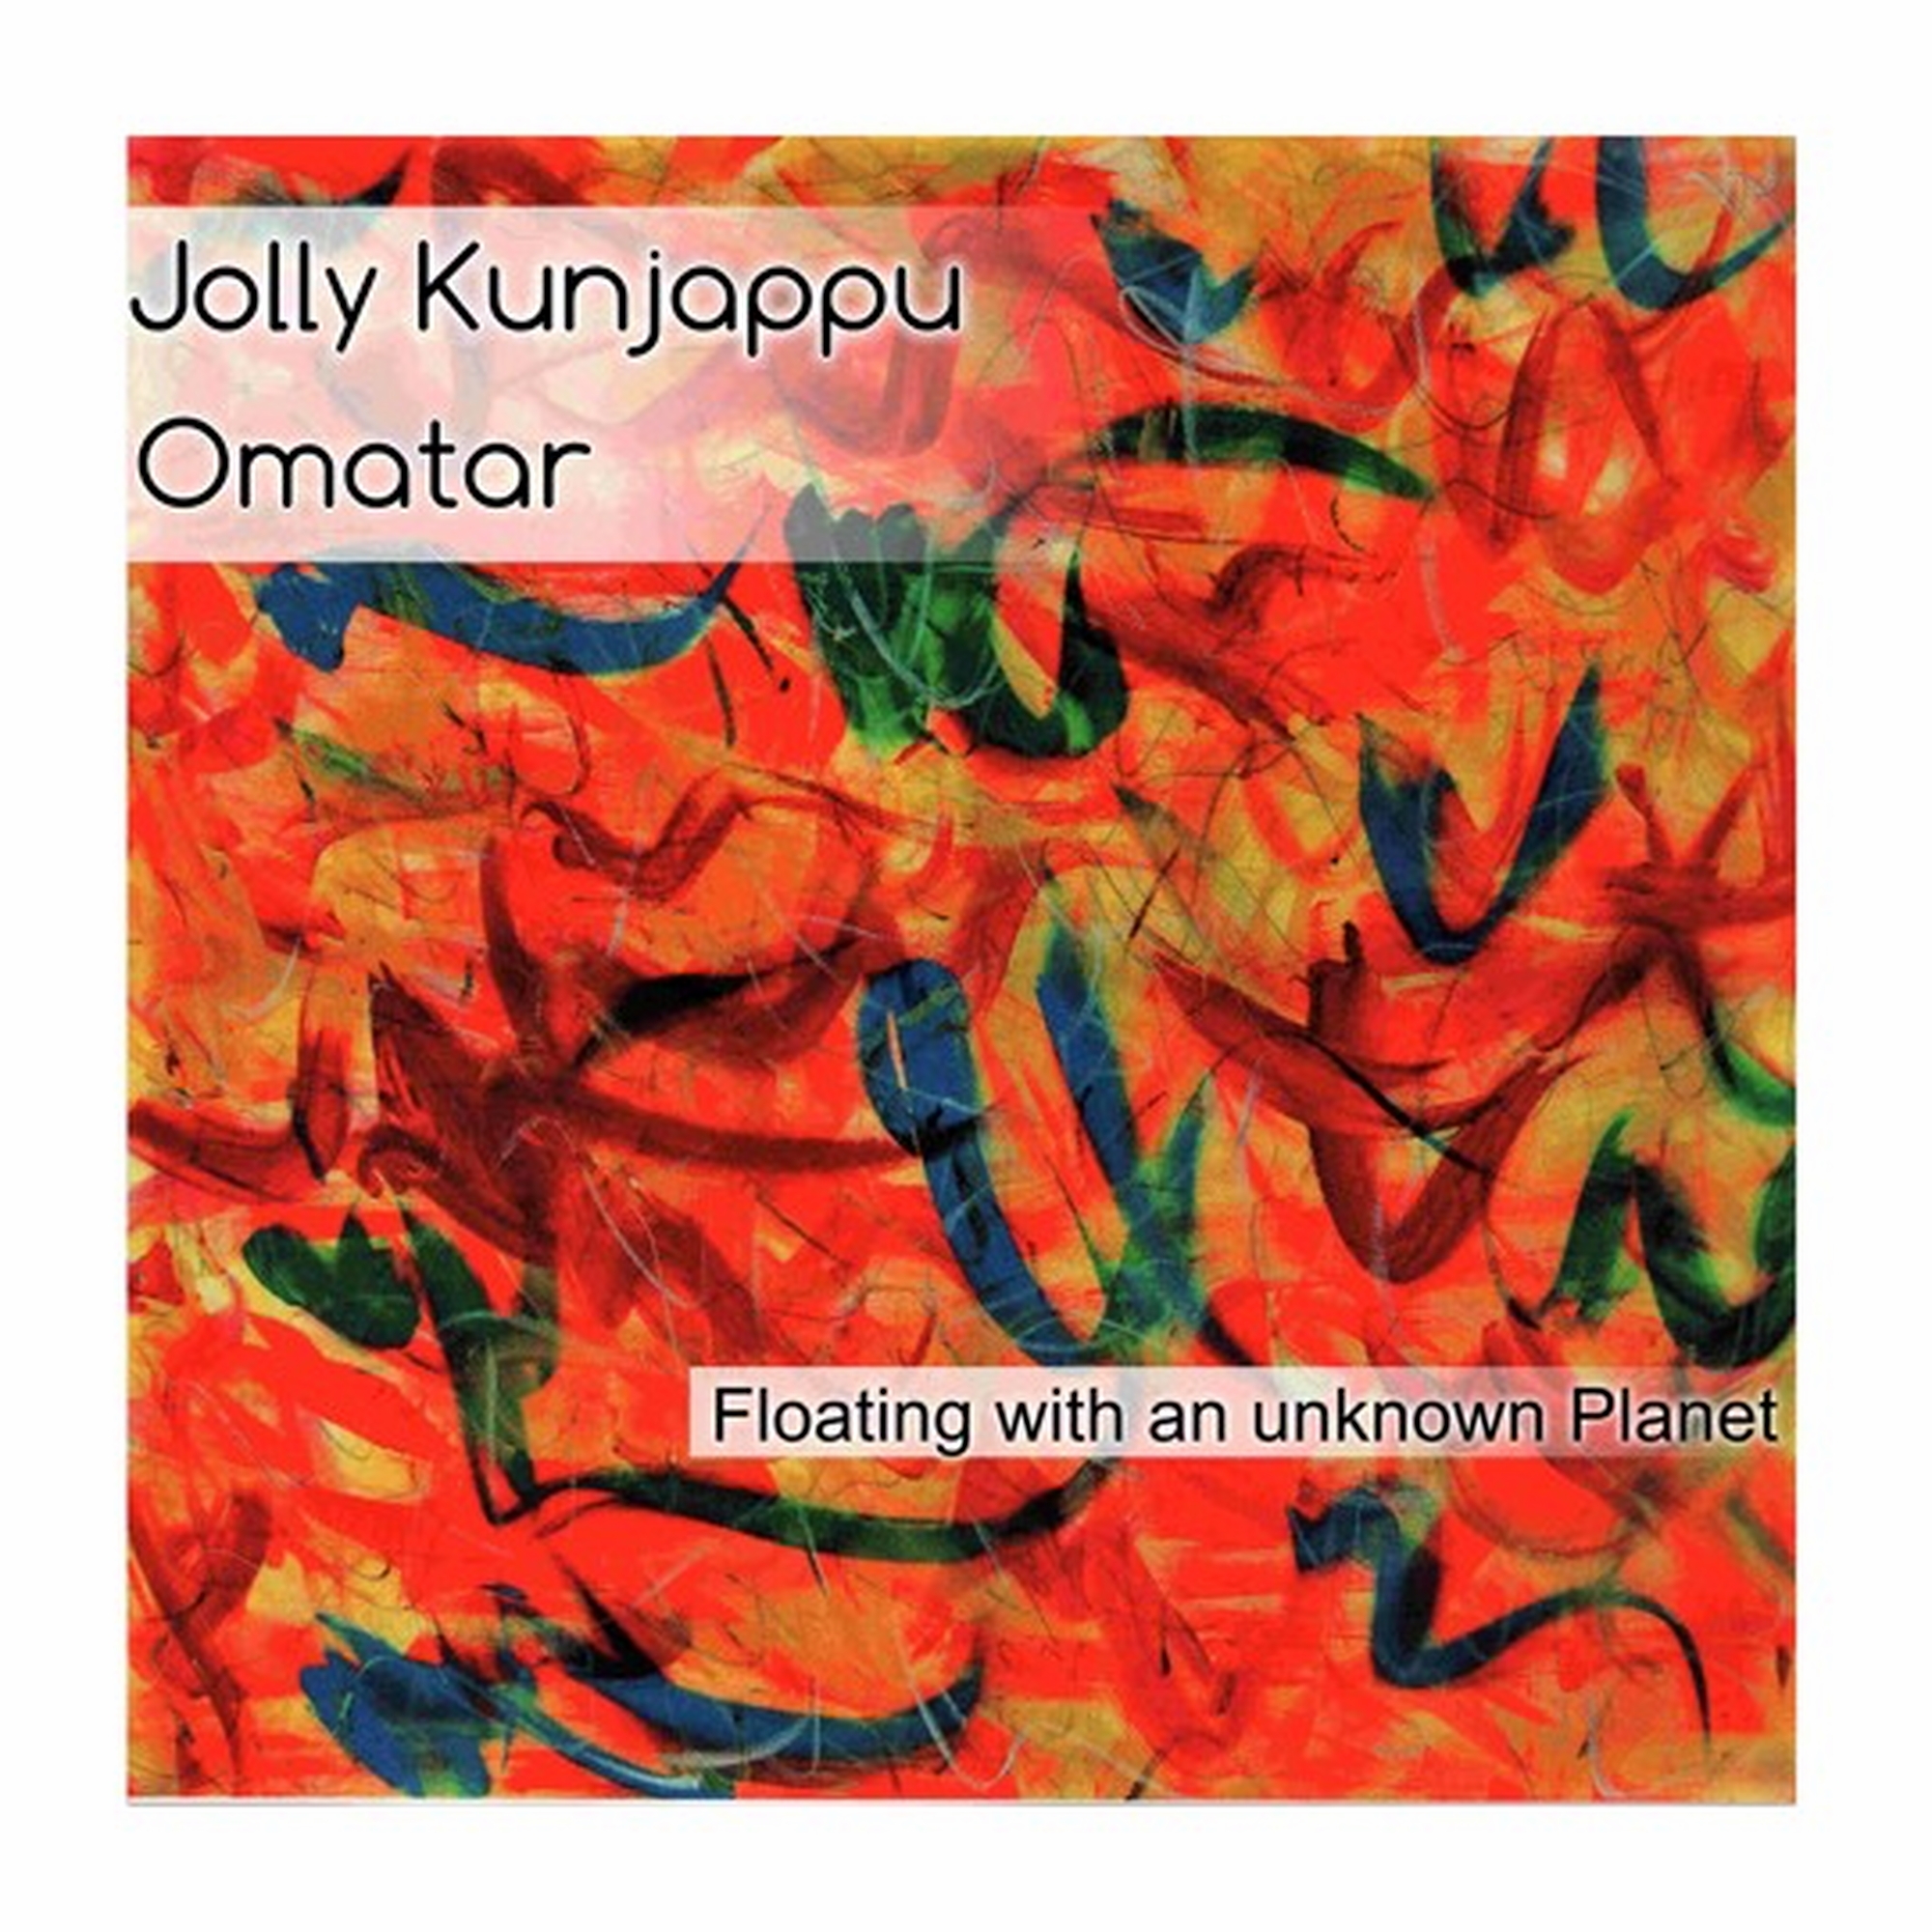 Kunjappu-Omatar-Floating-with-an-unknown-planet